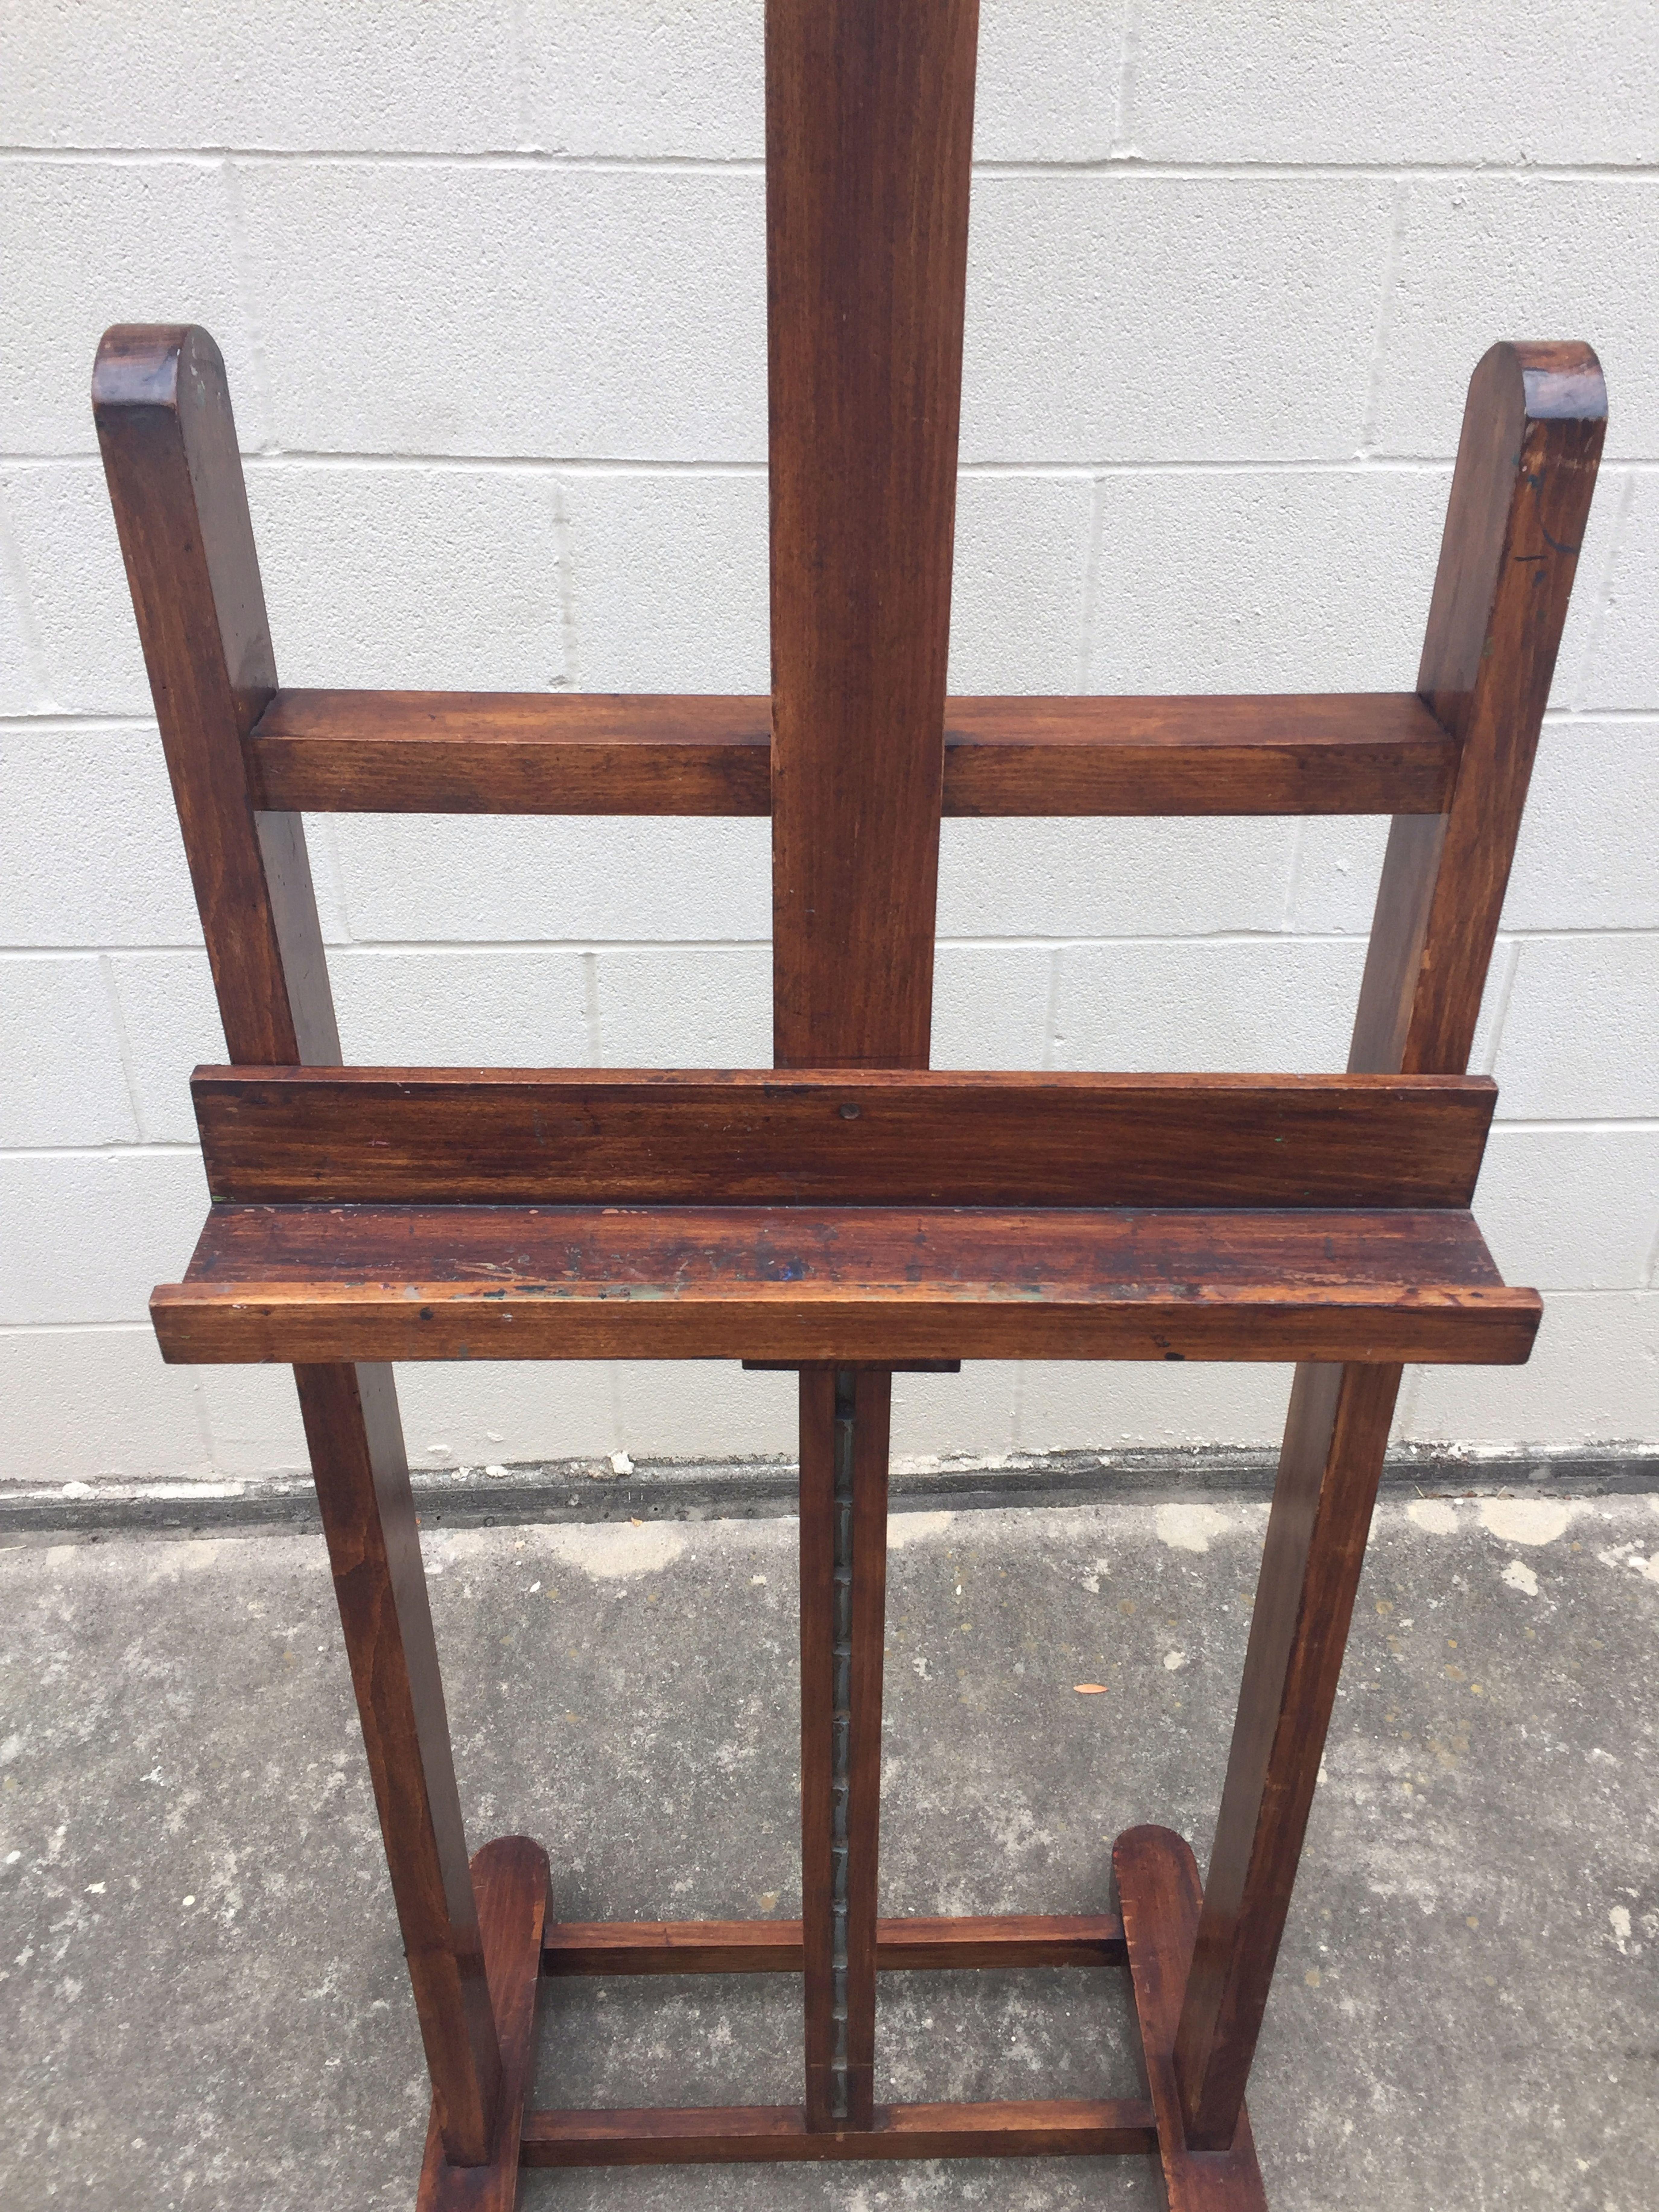 Large English Artist's Display or Floor Easel with Adjustable Tray 12